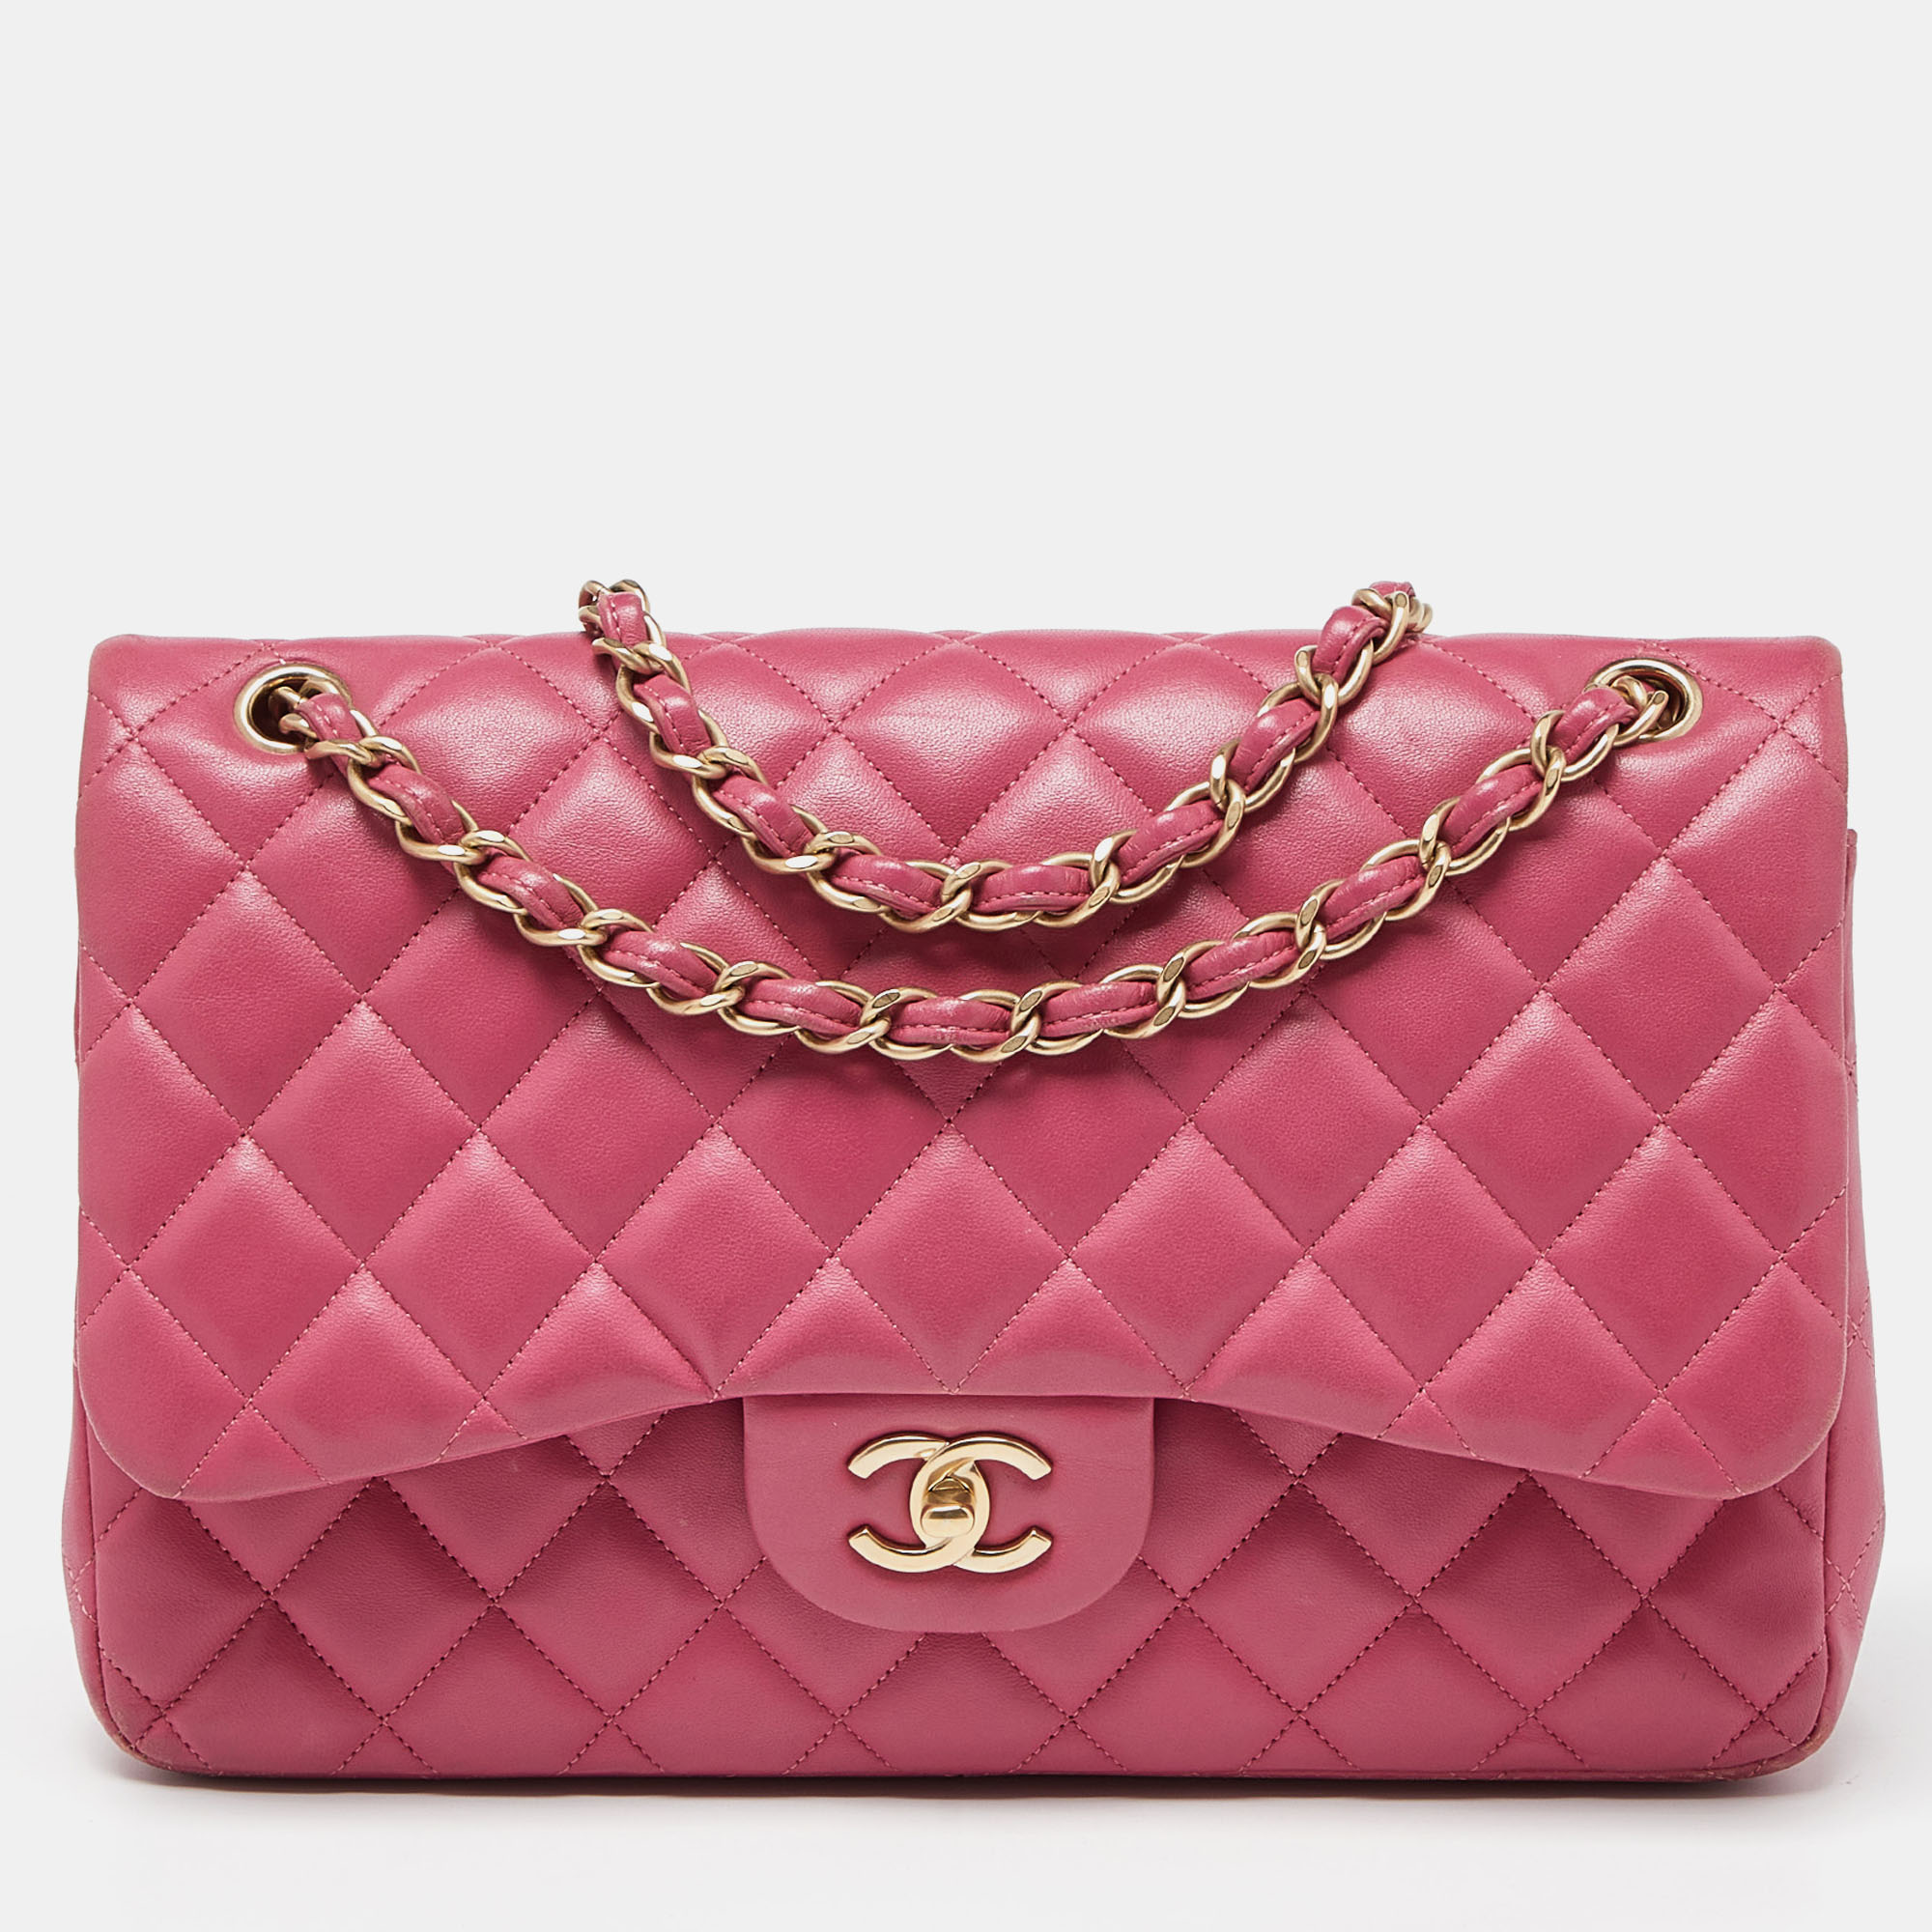 Chanel pink quilted leather jumbo classic double flap bag